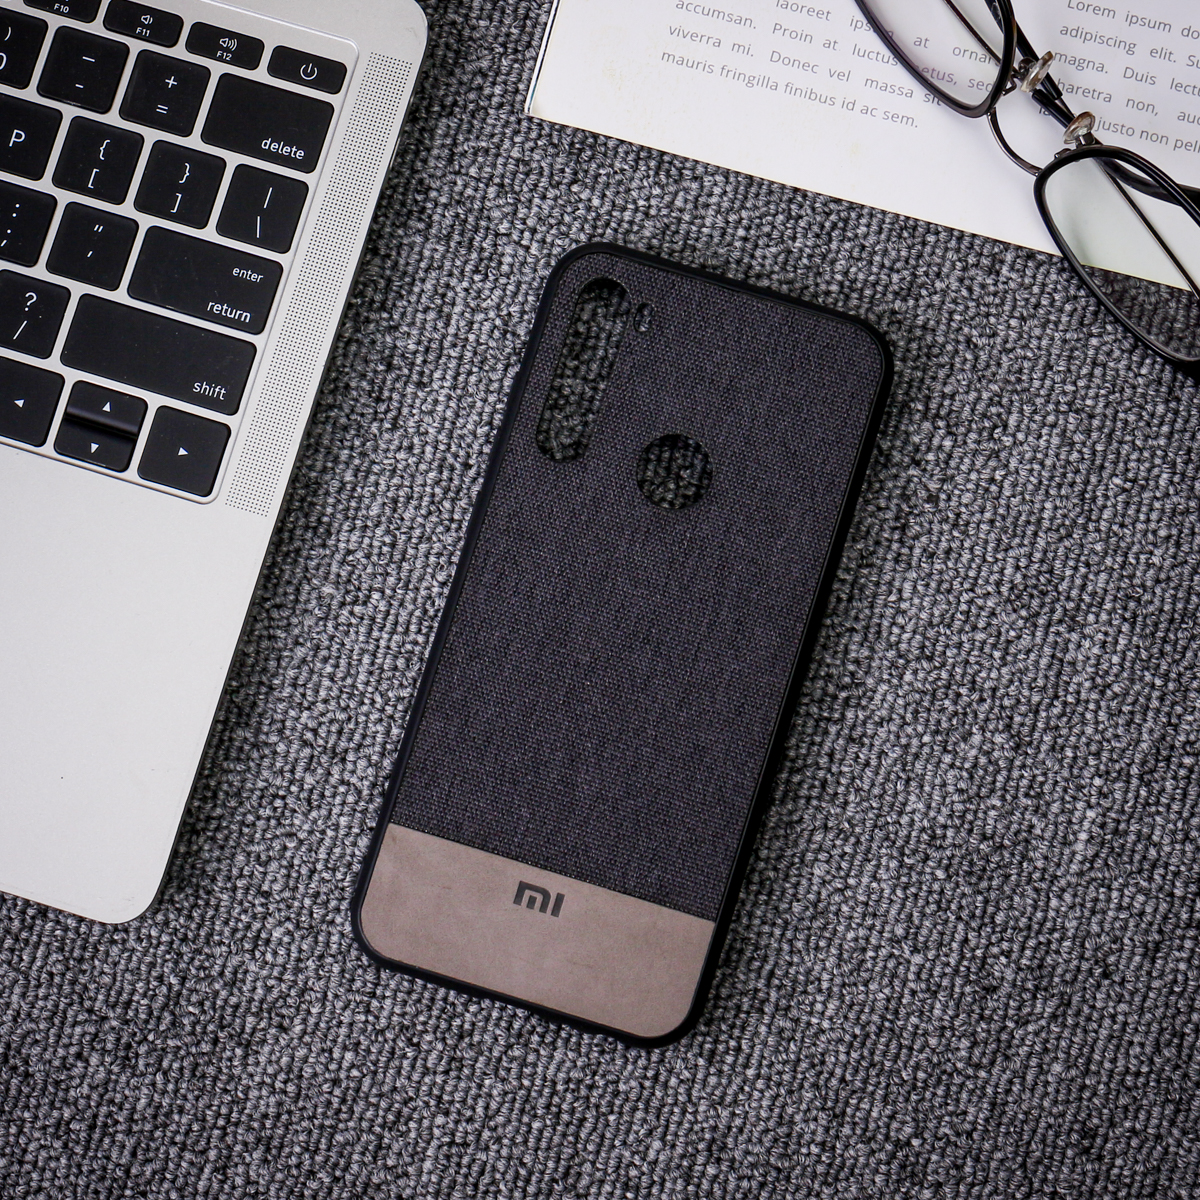 Bakeey-Luxury-Fabric-Splice-Soft-Silicone-Edge-Shockproof-Protective-Case-For-Xiaomi-Redmi-Note-8T-1607253-10